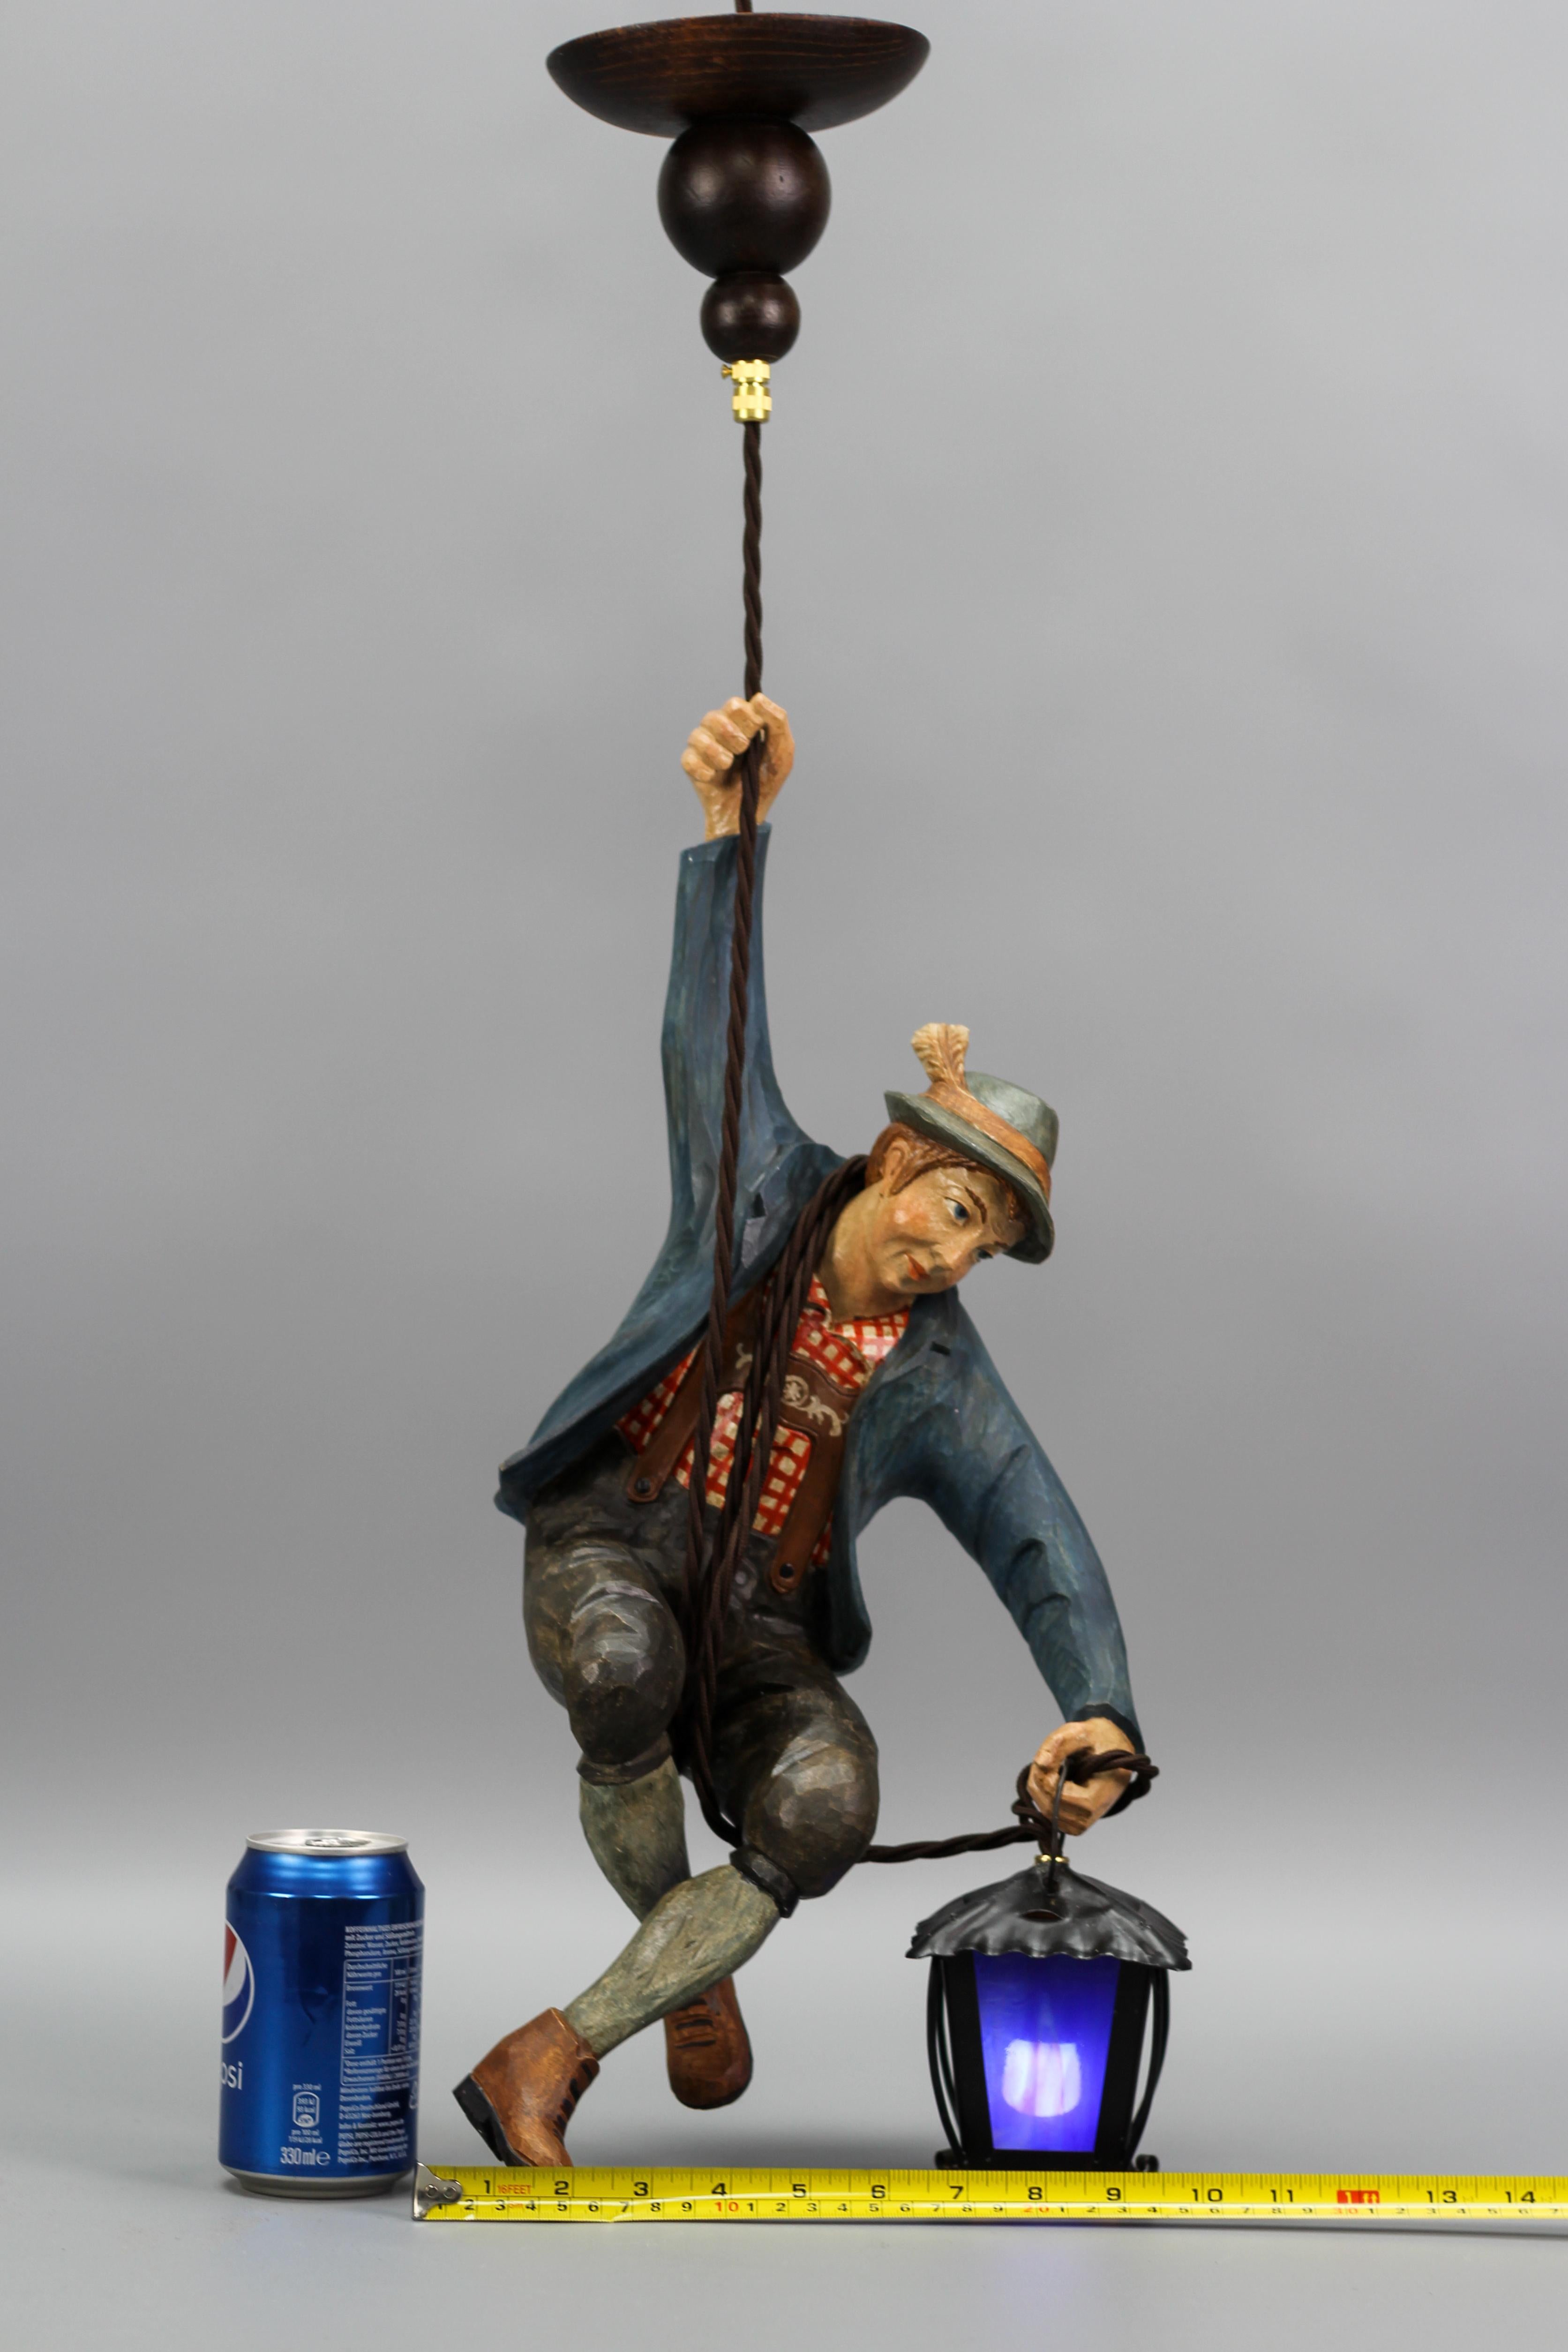 Pendant Light with Figure of a Mountain Climber and a Blue Glass Lantern For Sale 9